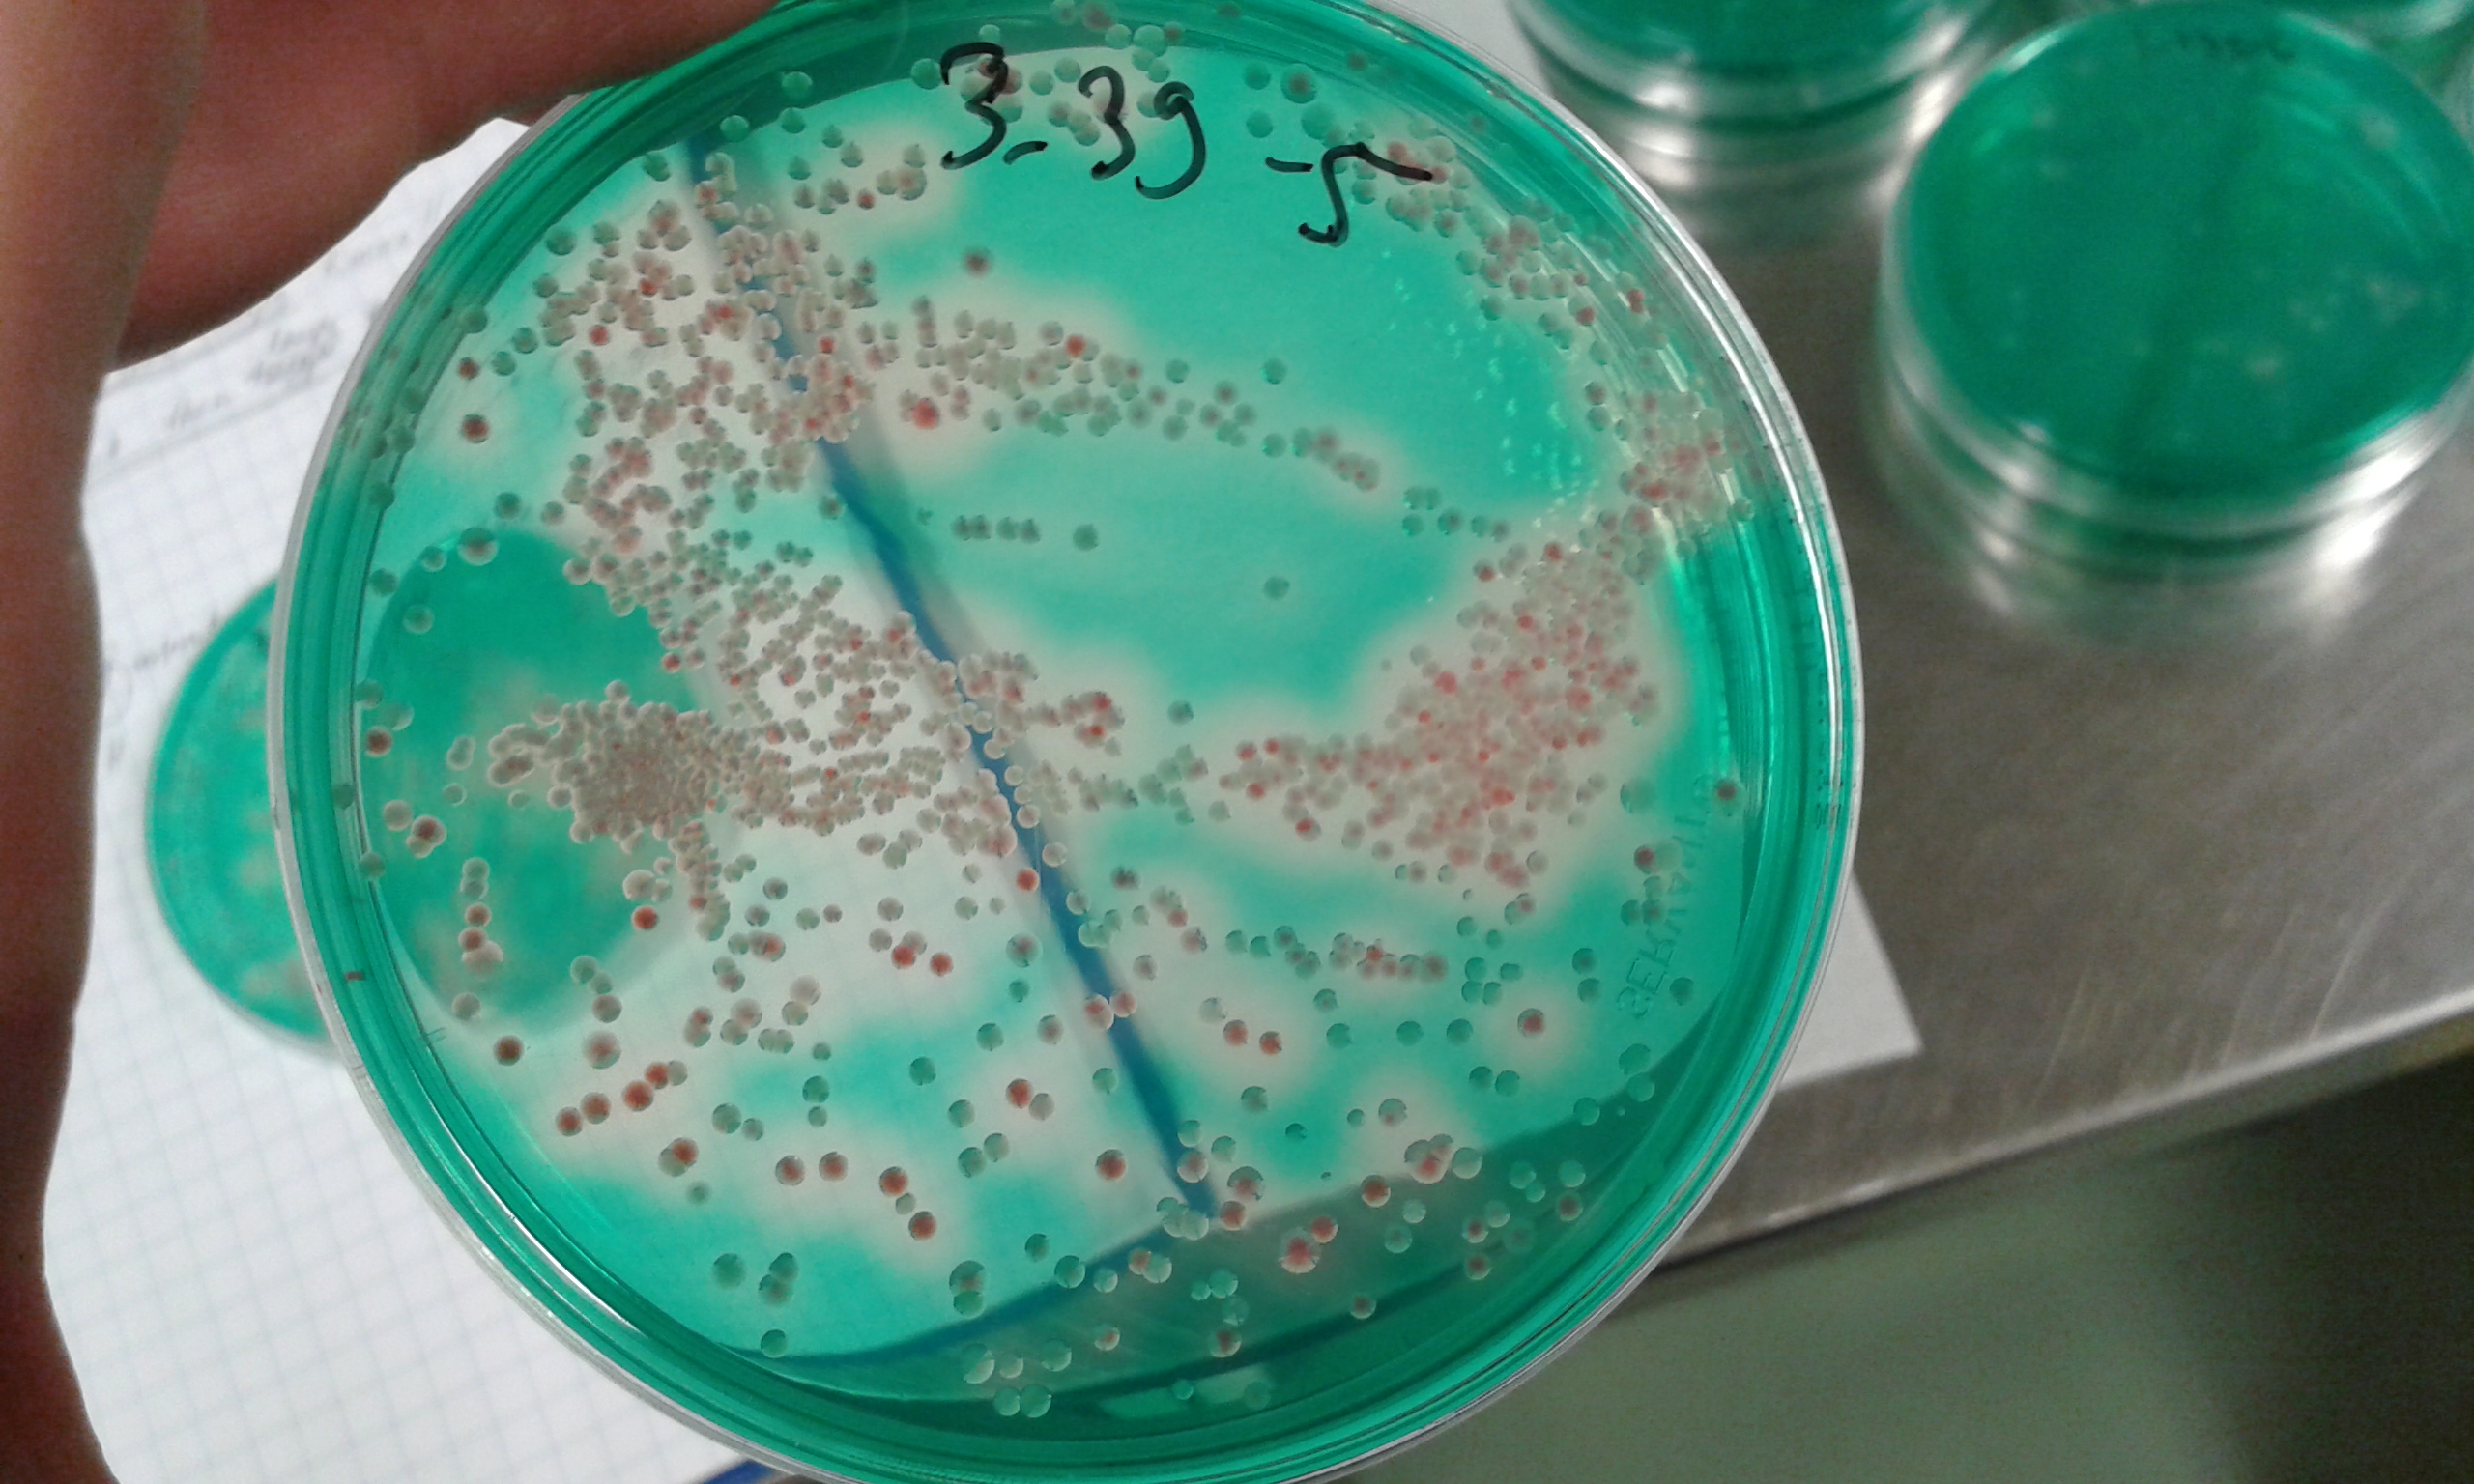 Example of DNAse-agar plate used for recognizing invader species (Serratia marcescens) that produce red pigment and a halo around colonies. Other species used in the experiment can be seen as white colonies without a halo. 